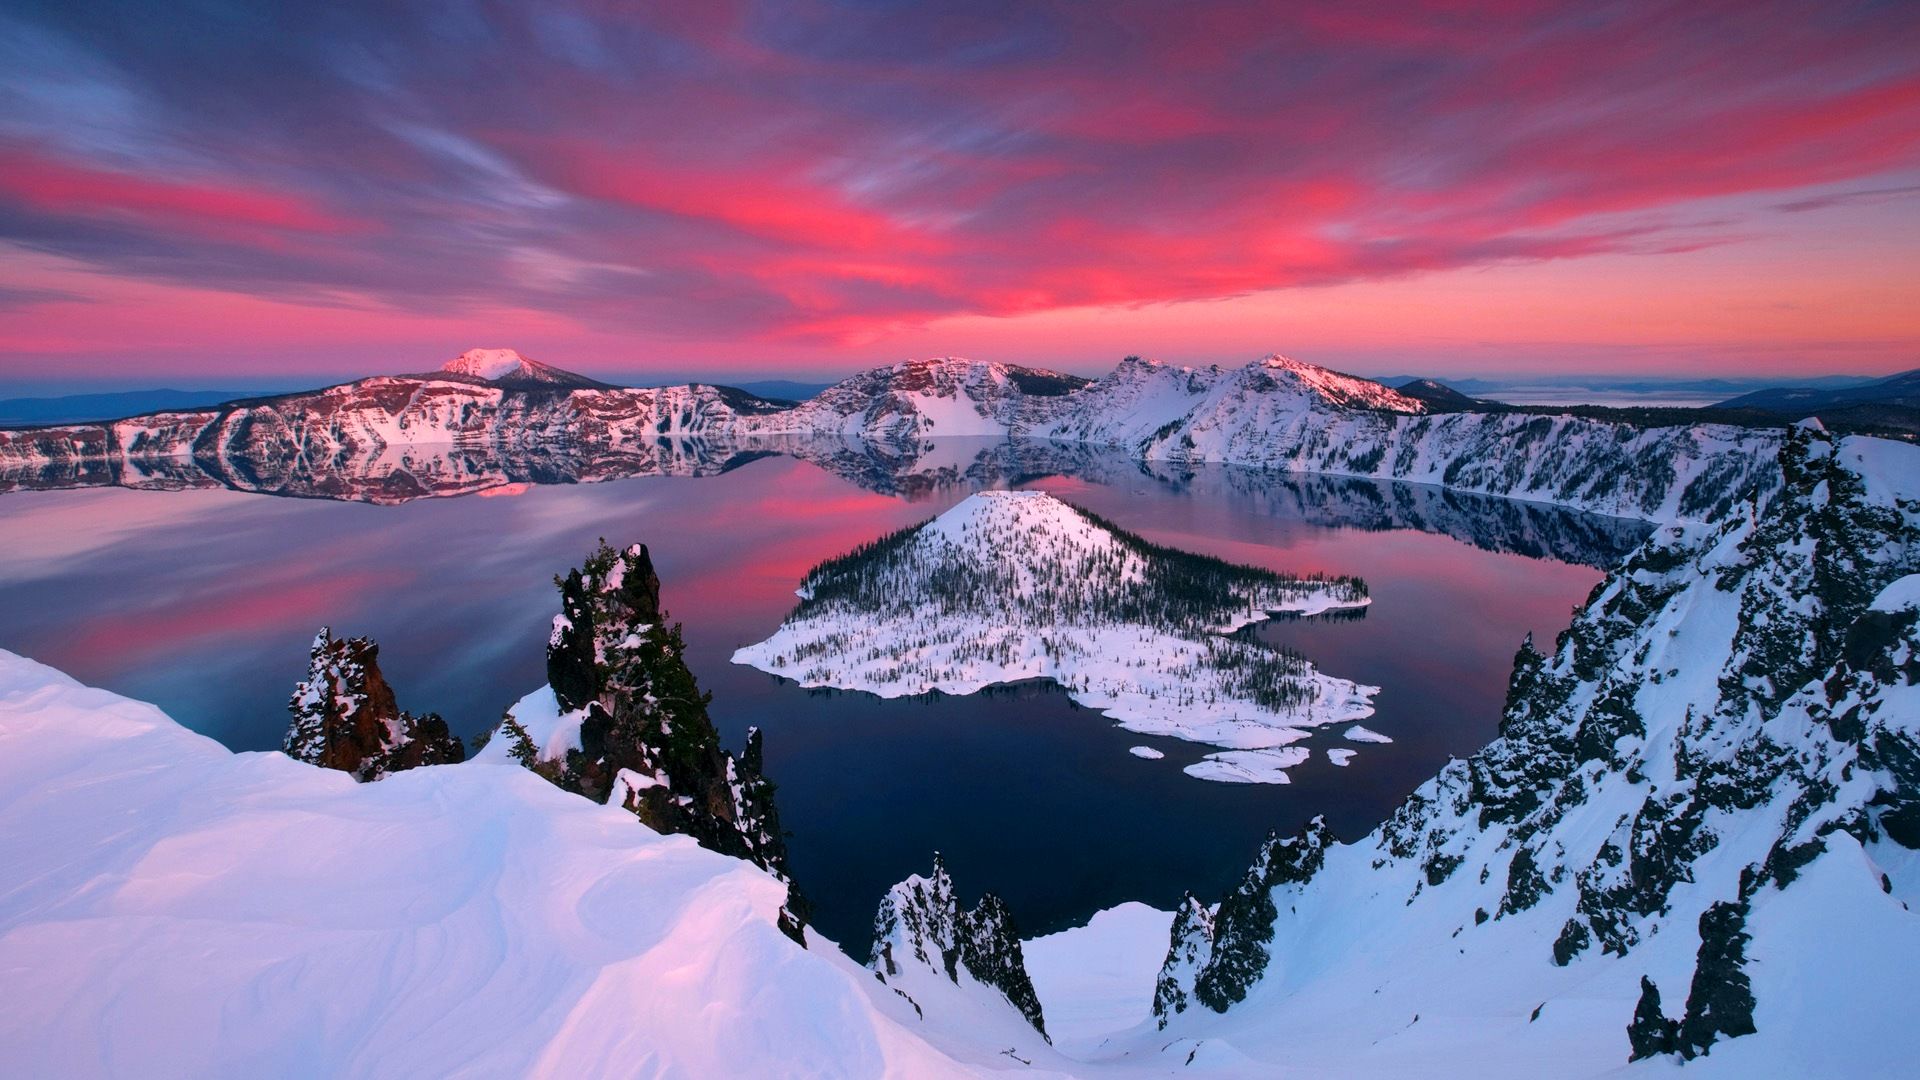 Crater Lake Oregon The Following Photo Is Of